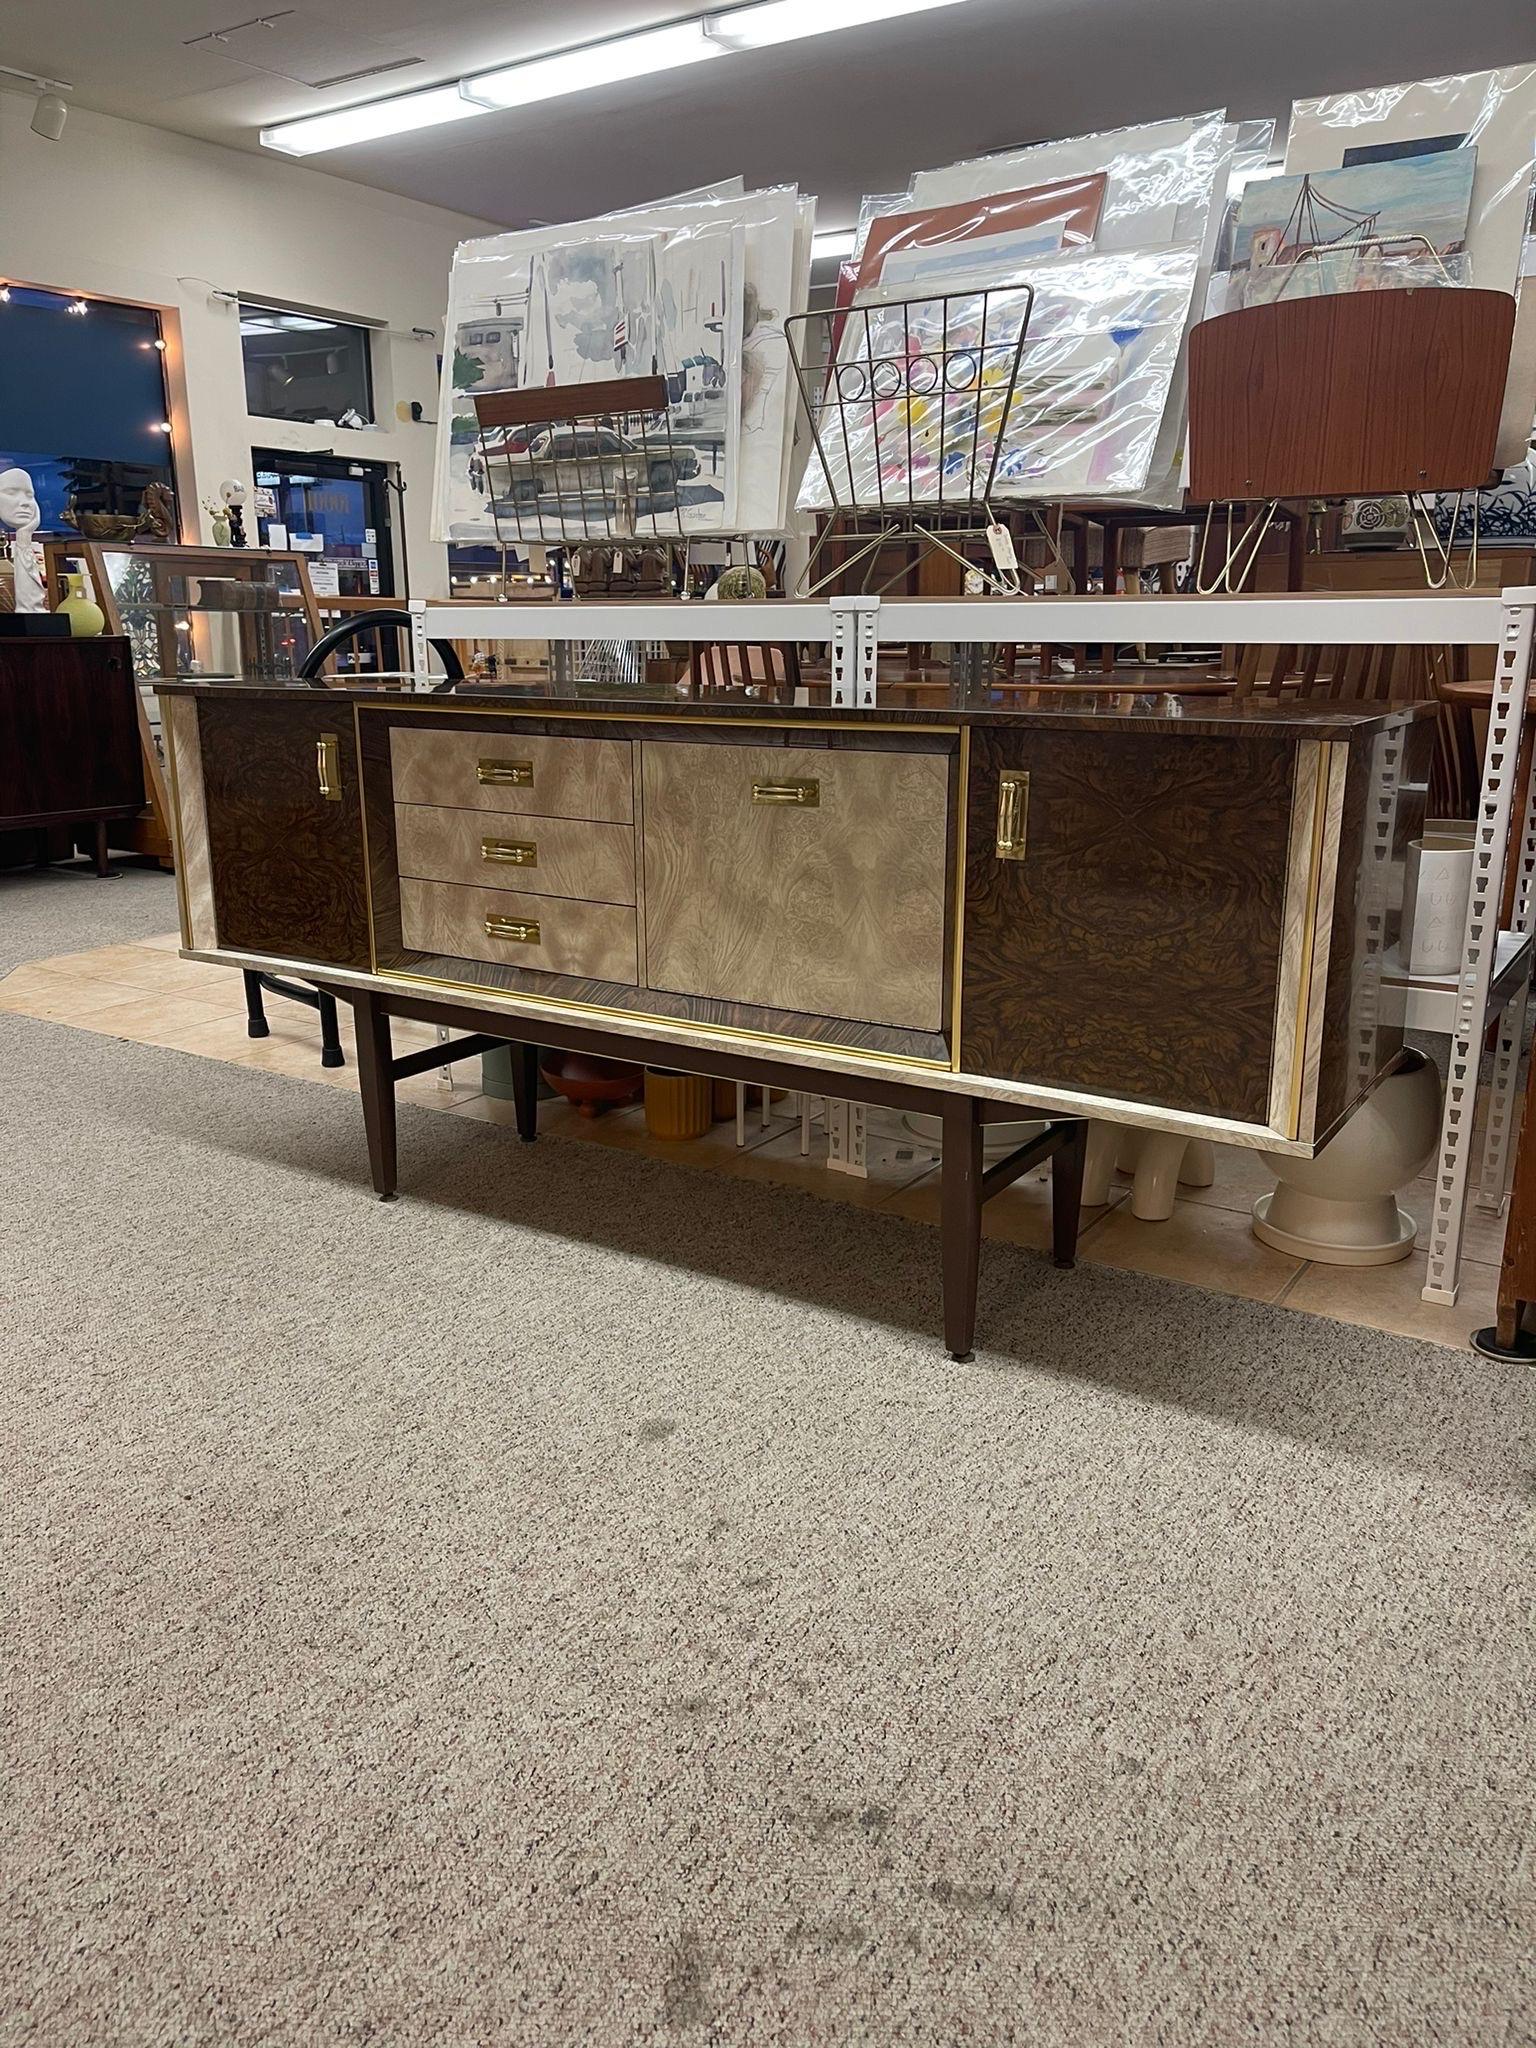 English Credenza with Unique Retro Design. Center Beige Section Features Three Drawers , Drop Front Cabinet. Outer Section Features Cabinet. Could be Used as a Bar Sideboard. Circa 1950s/1960s. Vintage Condition Consistent with Age as